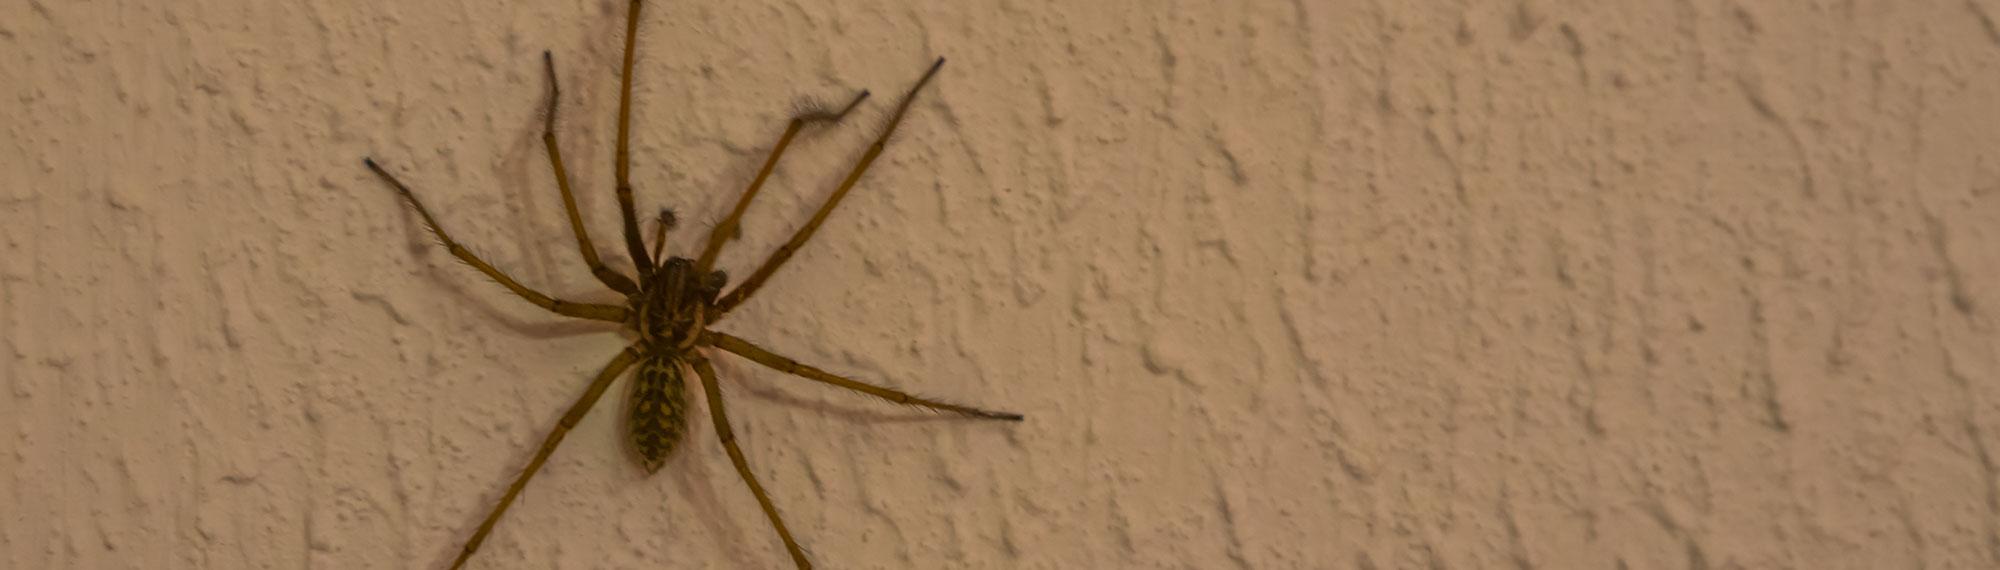 common house spider on wall